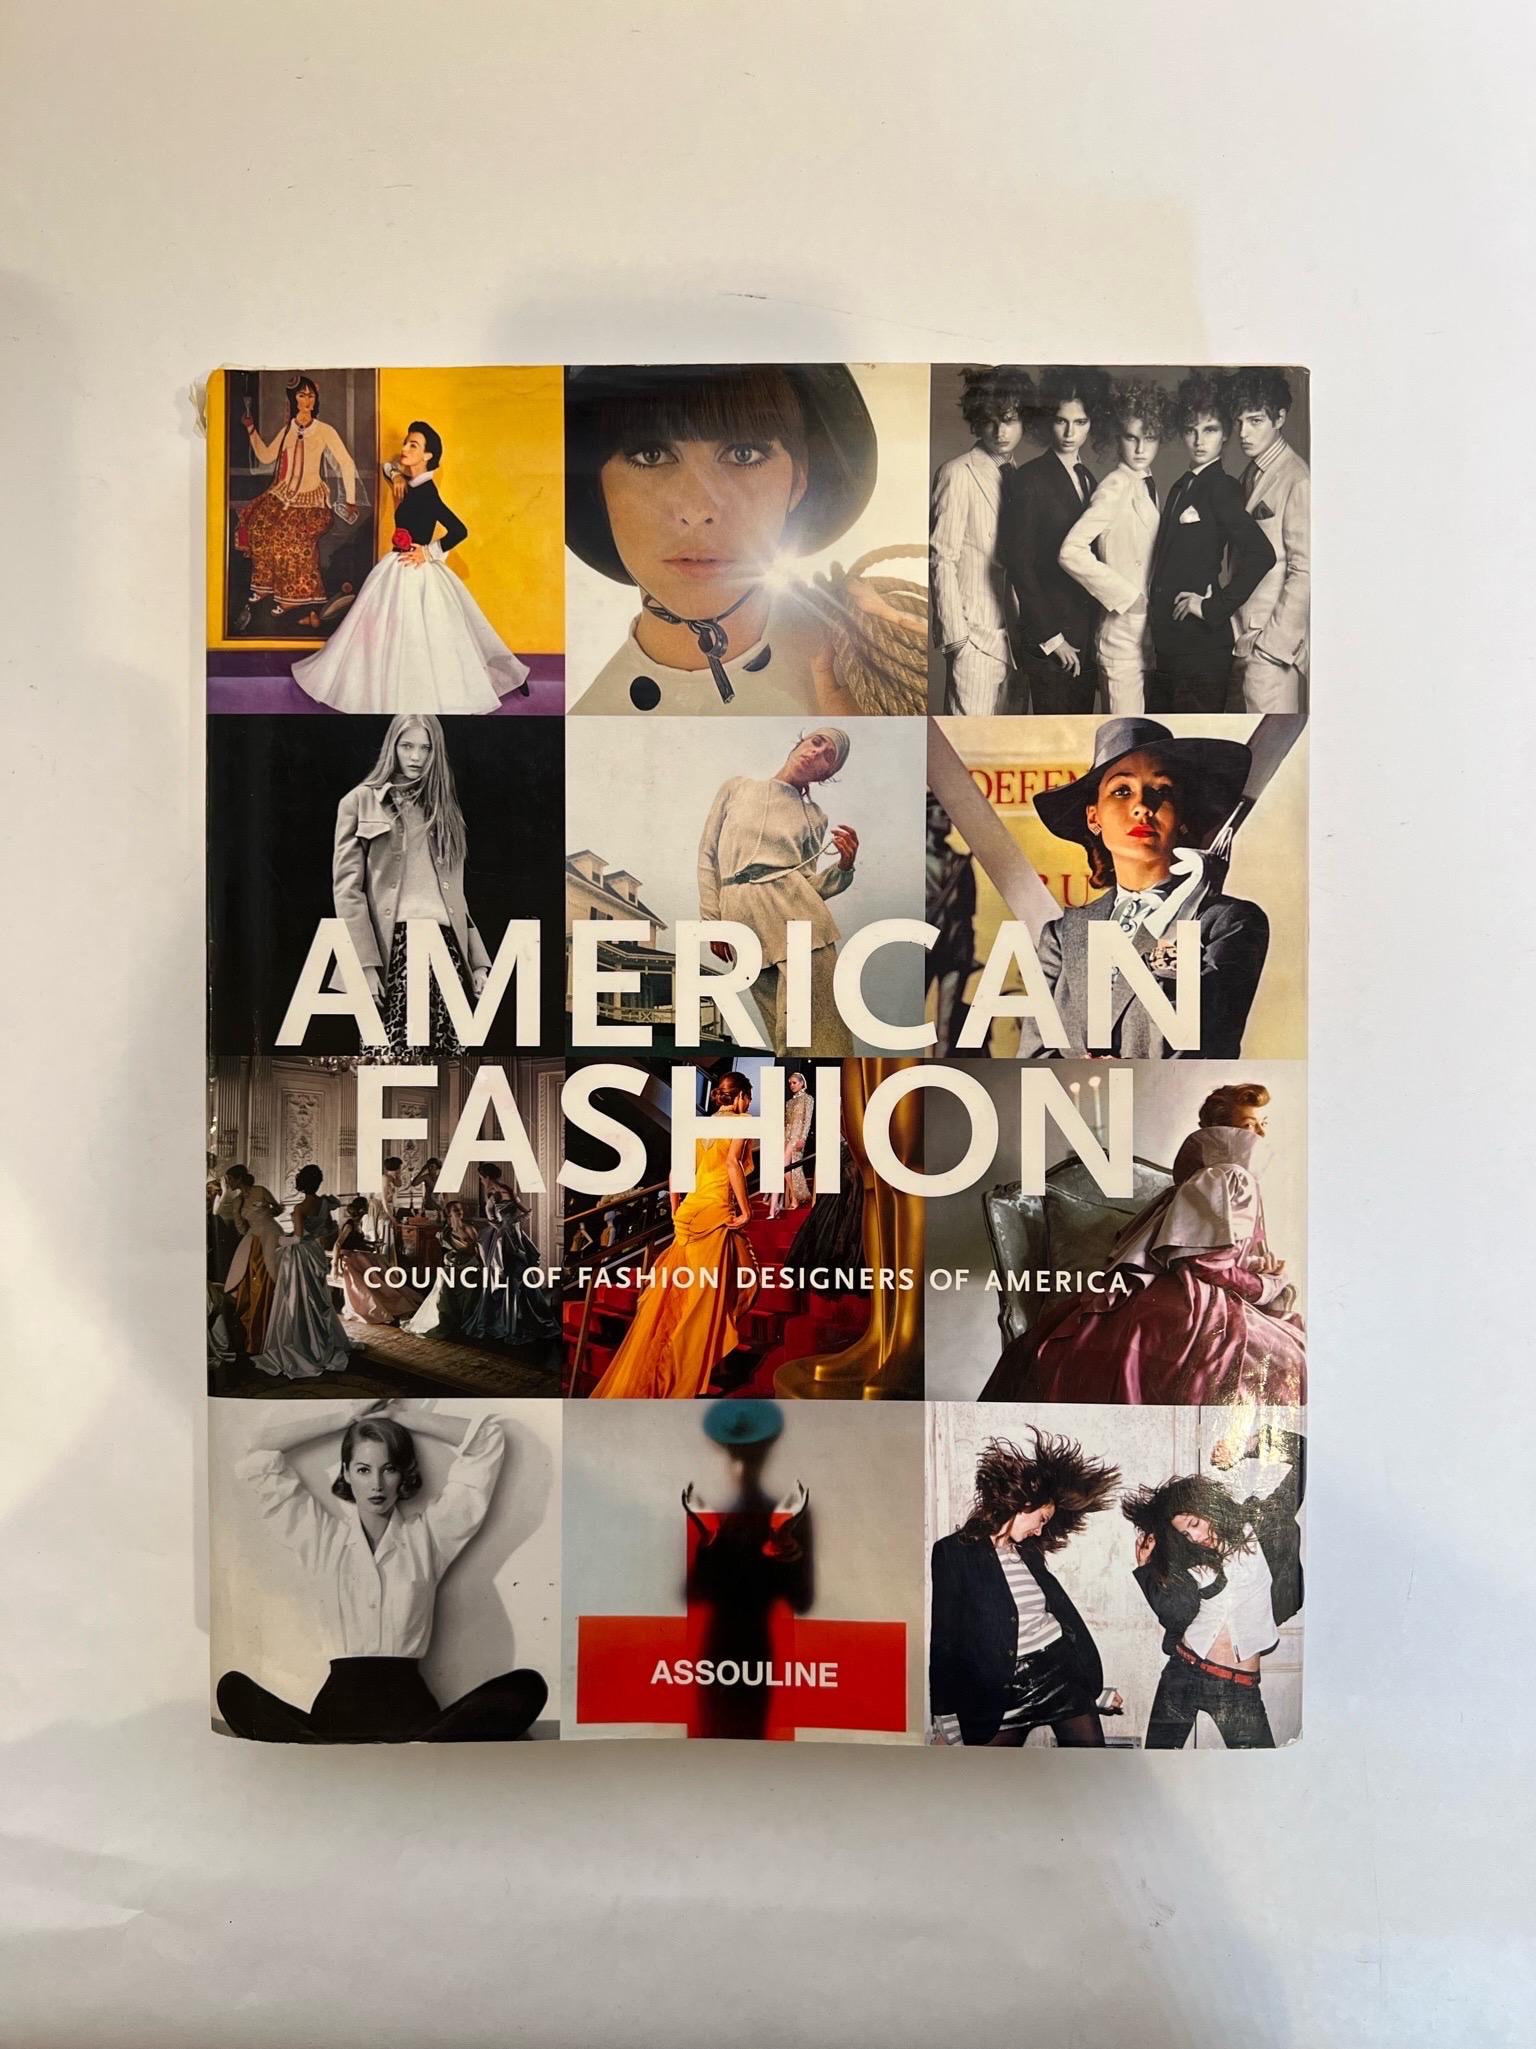 American Fashion Hardcover Coffee Table Book Assouline 2007.
American Fashion by Assouline, published in 2007 is a comprehensive and beautifully illustrated overview of the history of fashion in the United